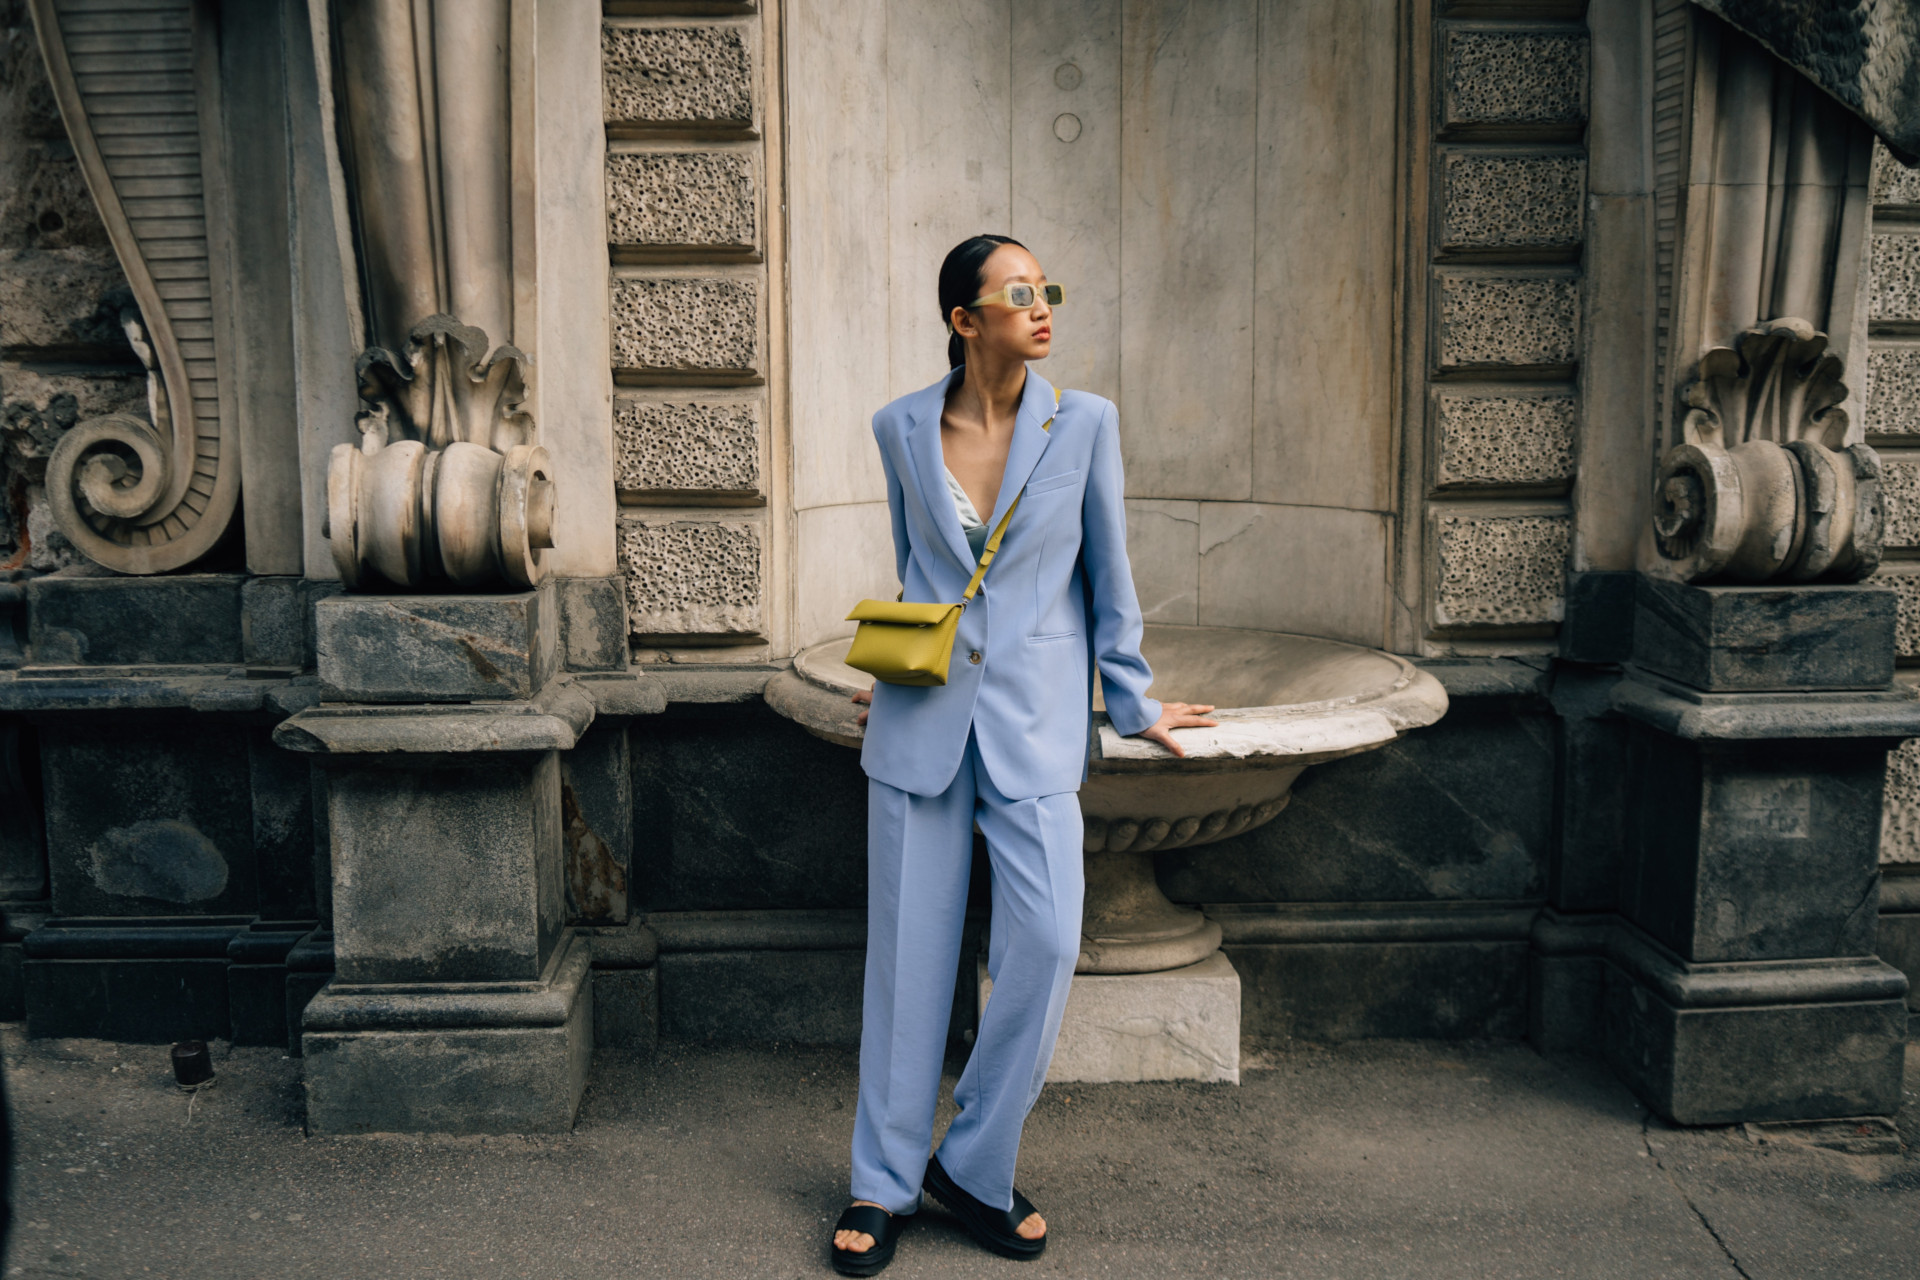 Woman in Blue Suit and Green Handbag Standing Beside Building